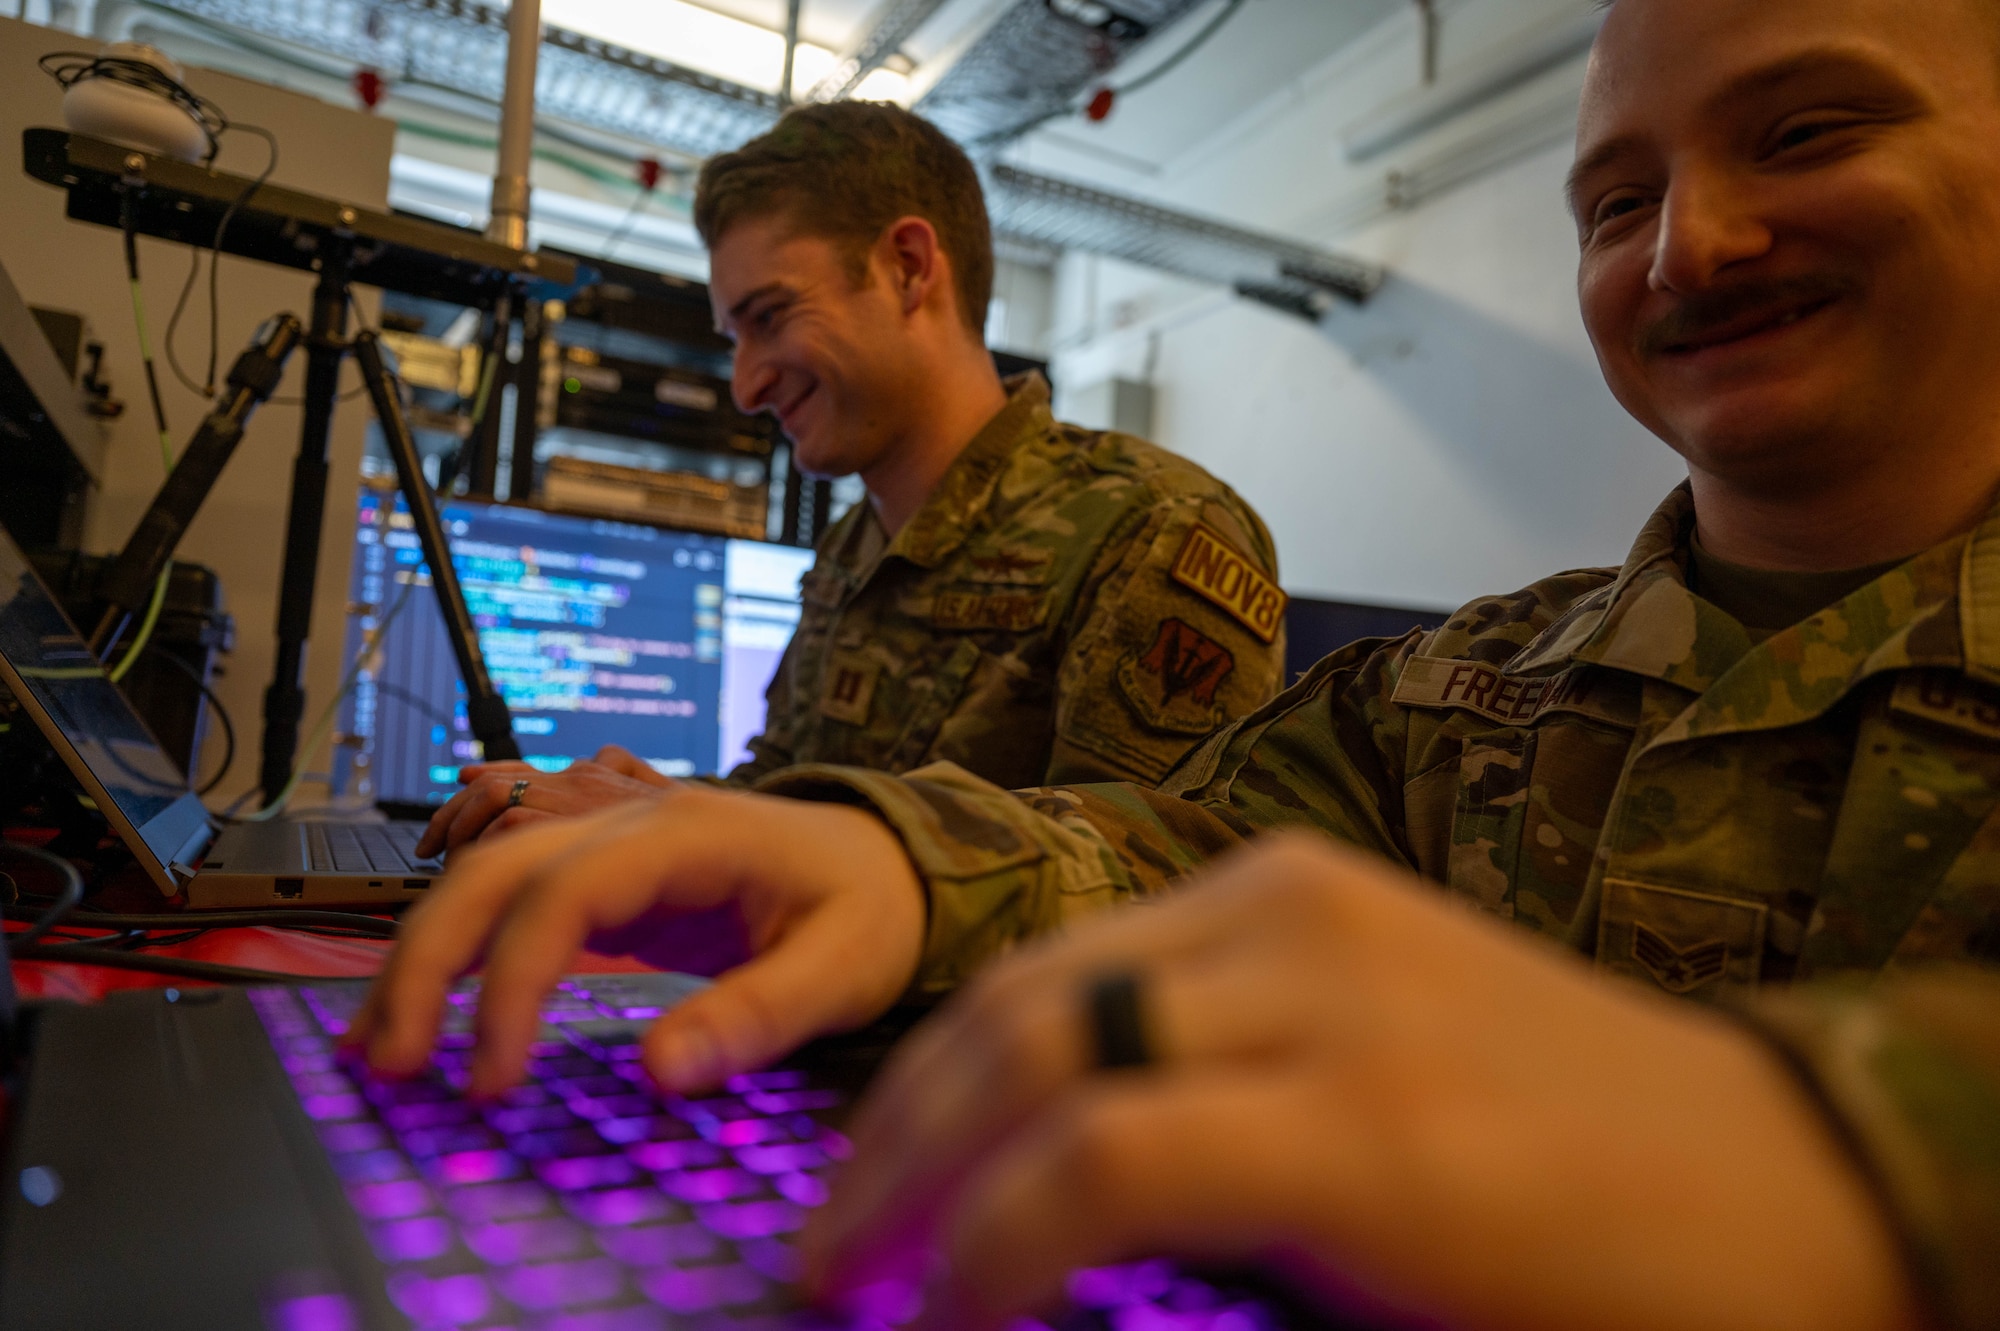 U.S. Air Force Capt. Isaiah Nicolai, Project Arc software developer, and Senior Airman Brandon Freeman, Project Arc computer scientist, work on coding to aid in Global Command and Control System processing improvements at Kapaun Air Station, Germany, April 9, 2024. The newly-implemented system developed by the Project Arc team will combine the GCCS with additional software to provide a blueprint for ground forces in combative preparation, planning and positioning—enabling them to move faster and smarter against adversaries. (U.S. Air Force photo by Senior Airman Jordan Lazaro)